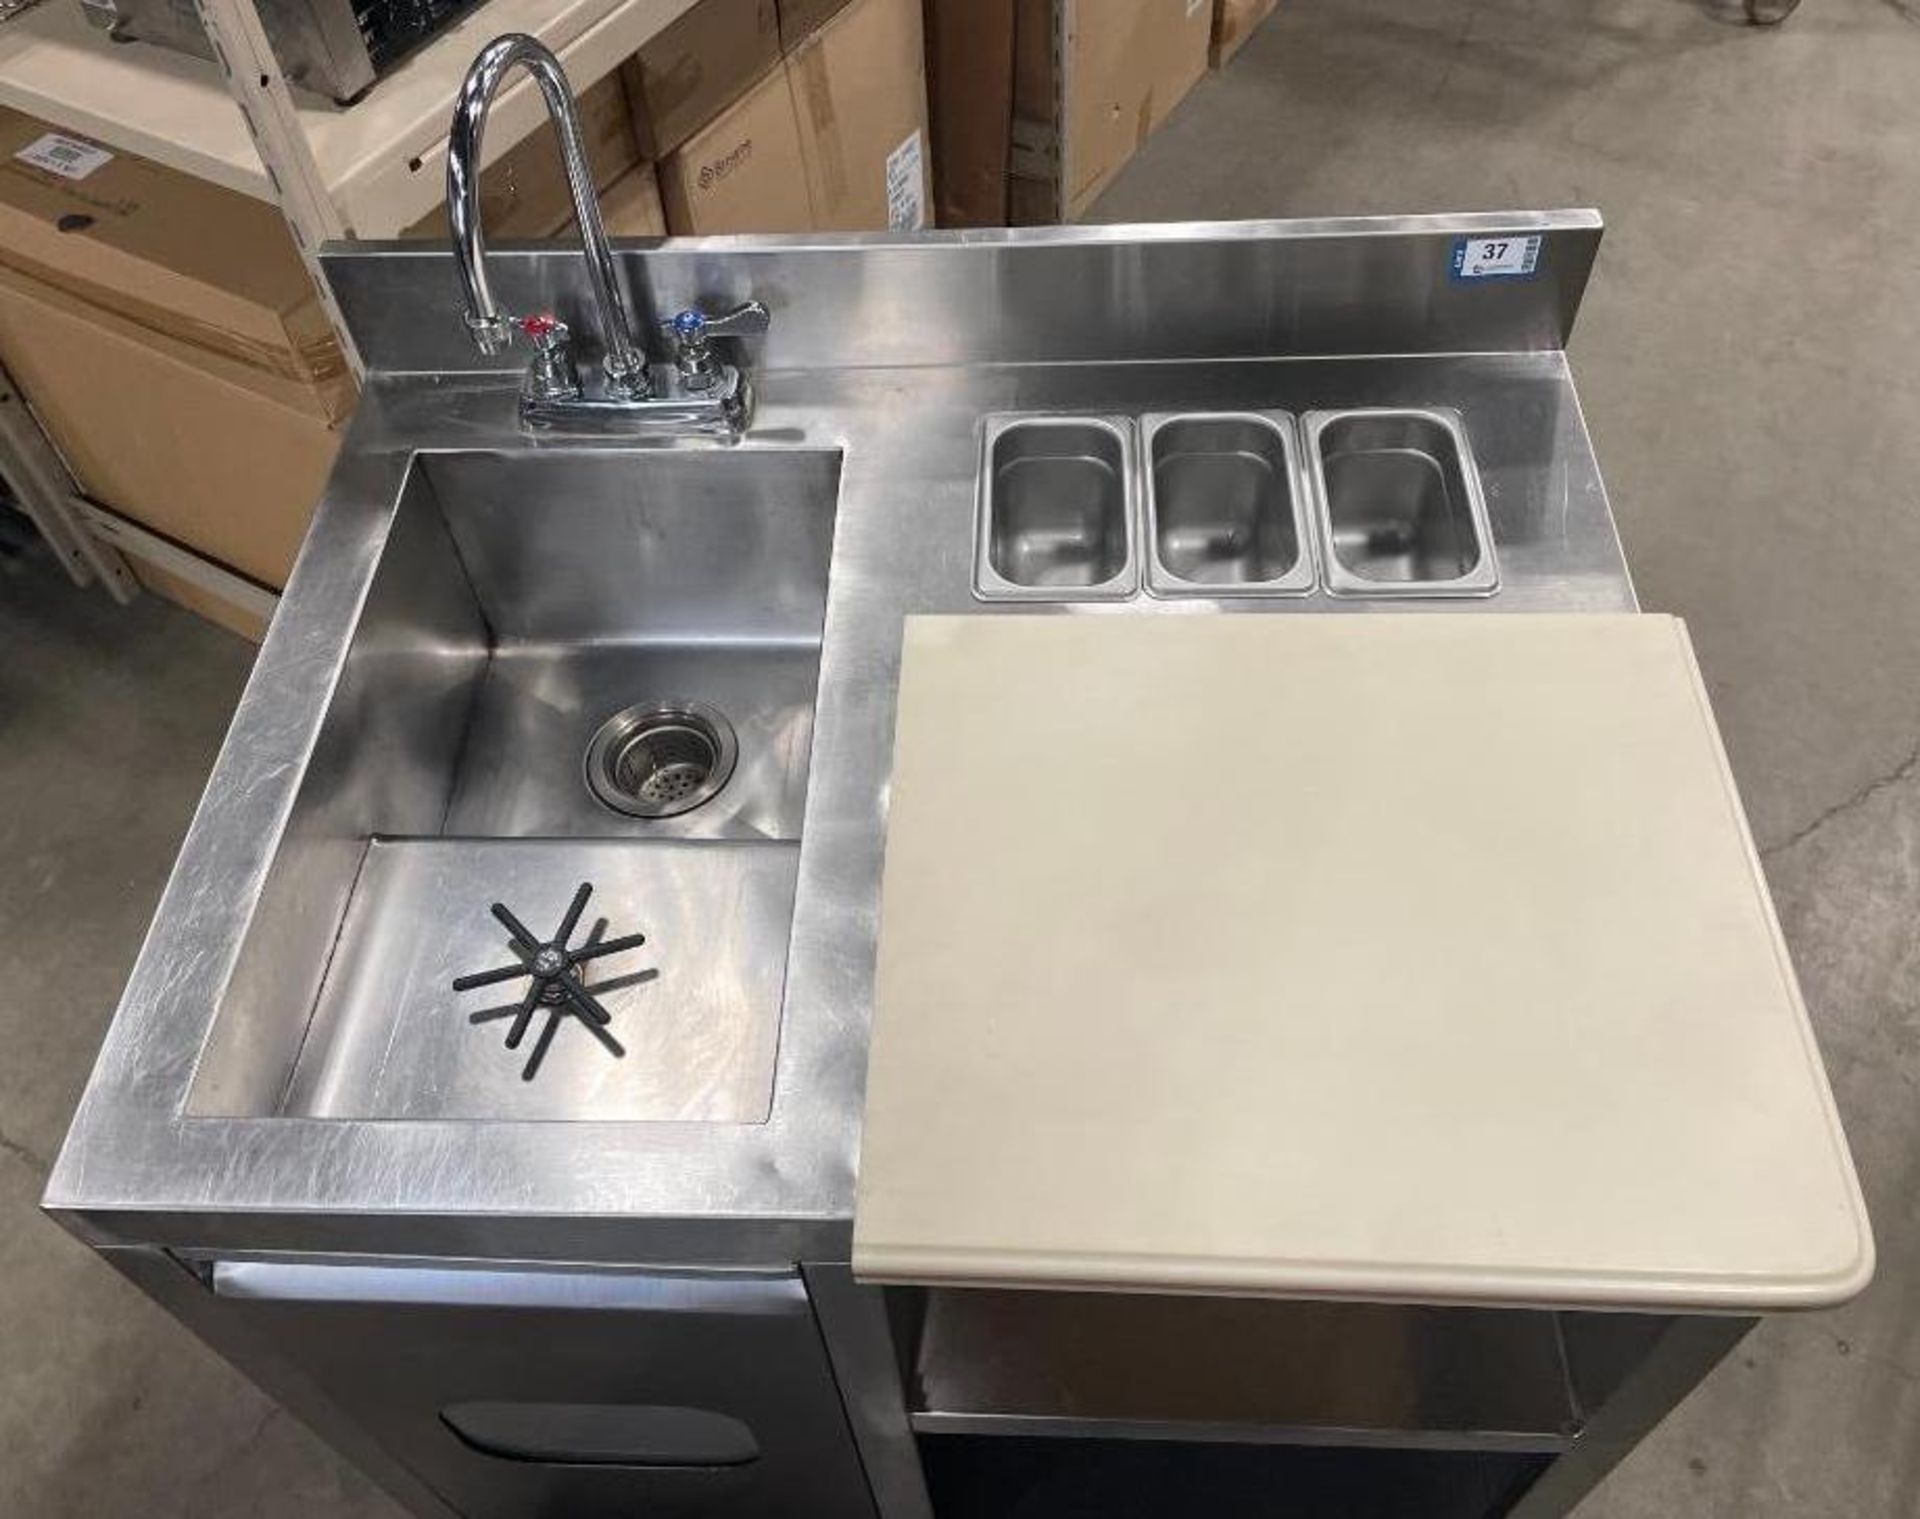 STAINLESS STEEL BEVERAGE TABLE WITH SINK, GLASS WASHER AND CUTTING BOARD - Image 2 of 14